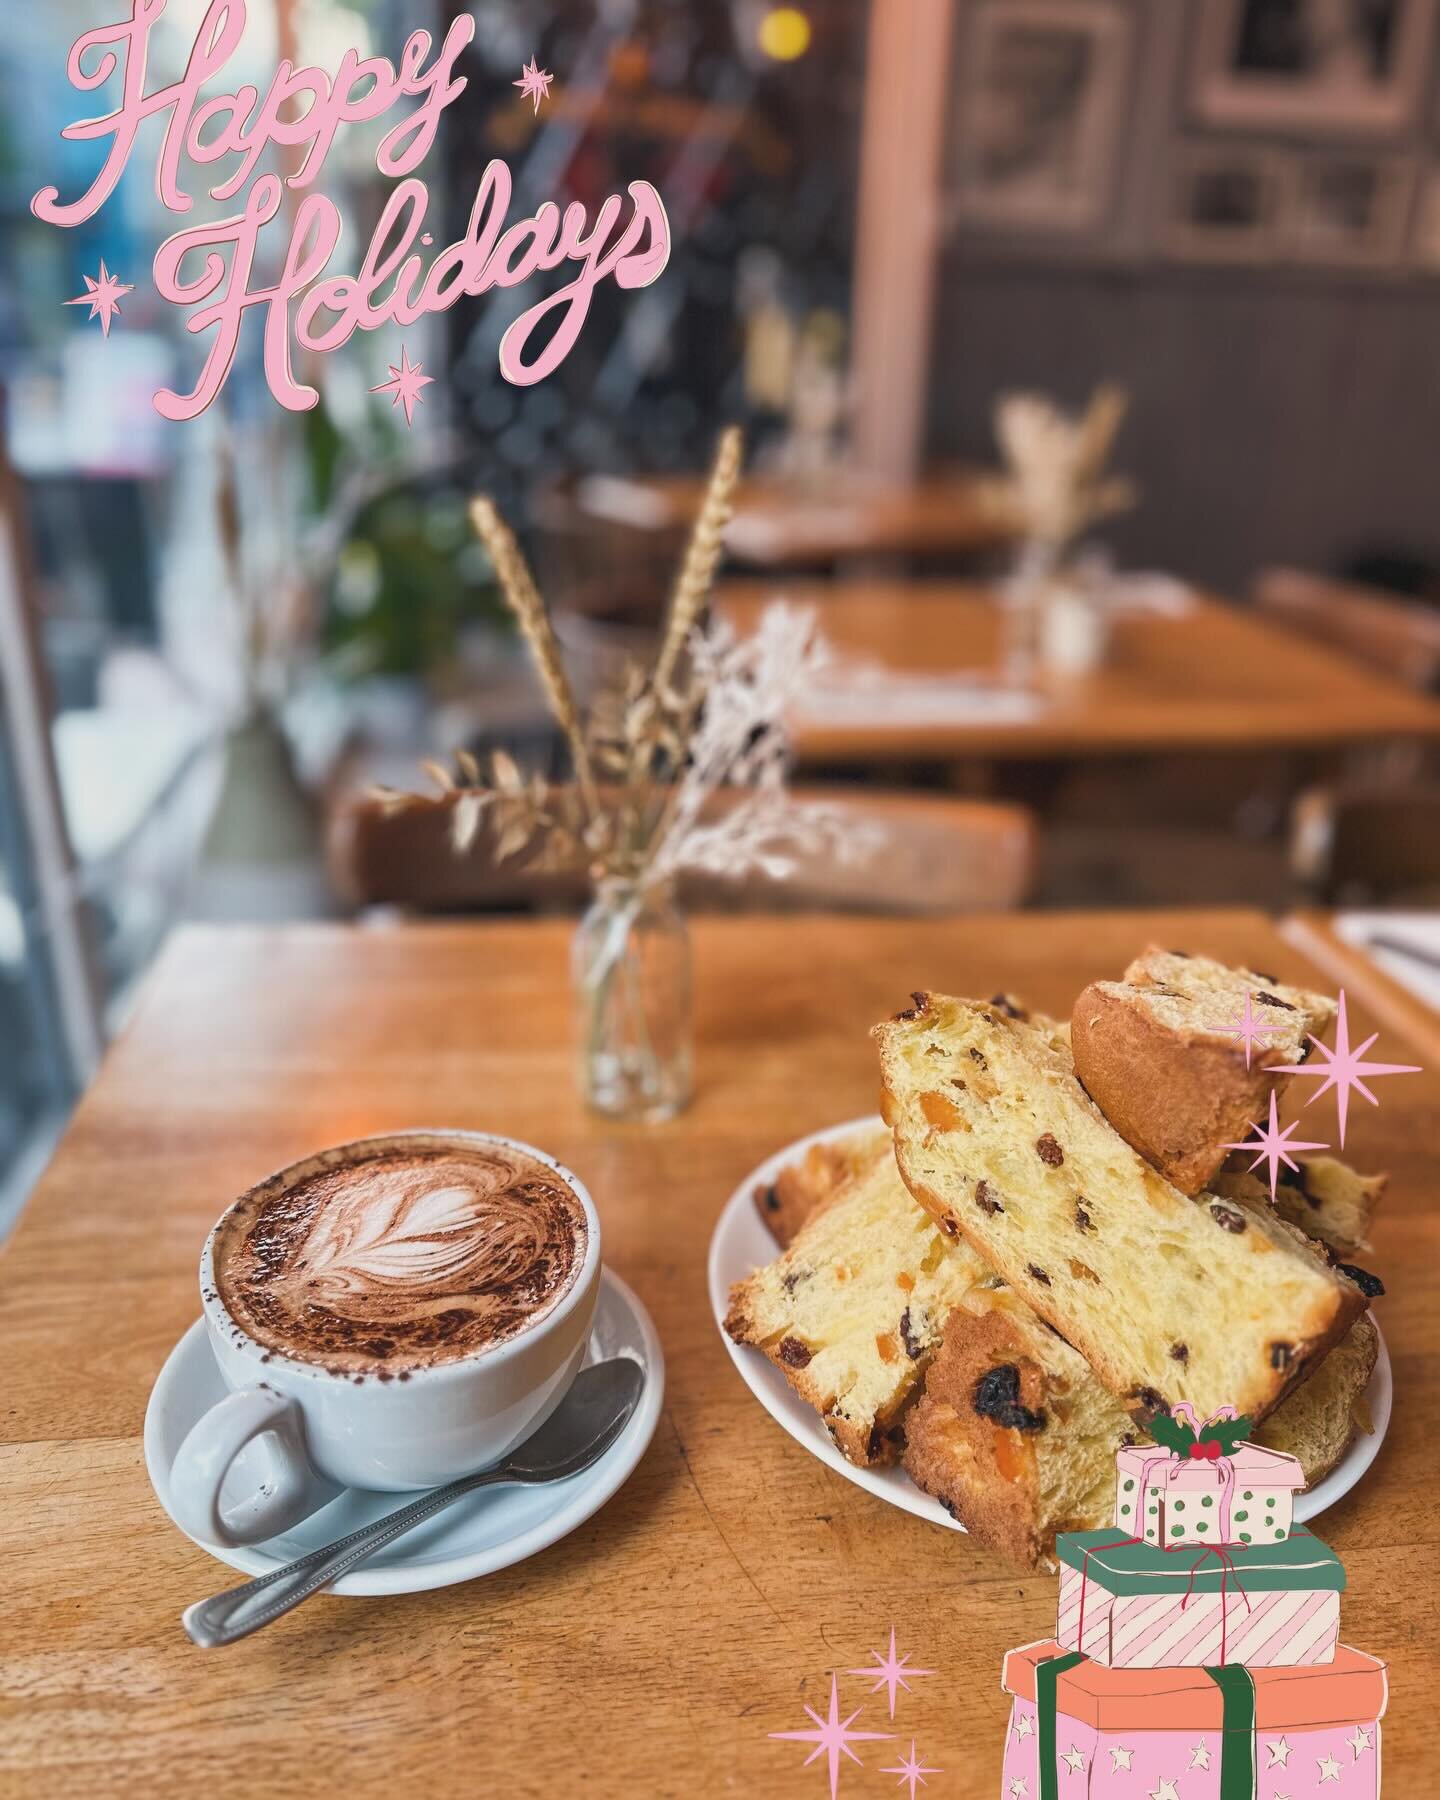 Come in and warm yourself up with a coffee or one of our fantastic hot chocolates. For those with a sweet tooth you can pair it with a slice of panettone that stirs up the Christmas spirit with its unique fragrance and inimitable lightness 😍😋🎄☕️

